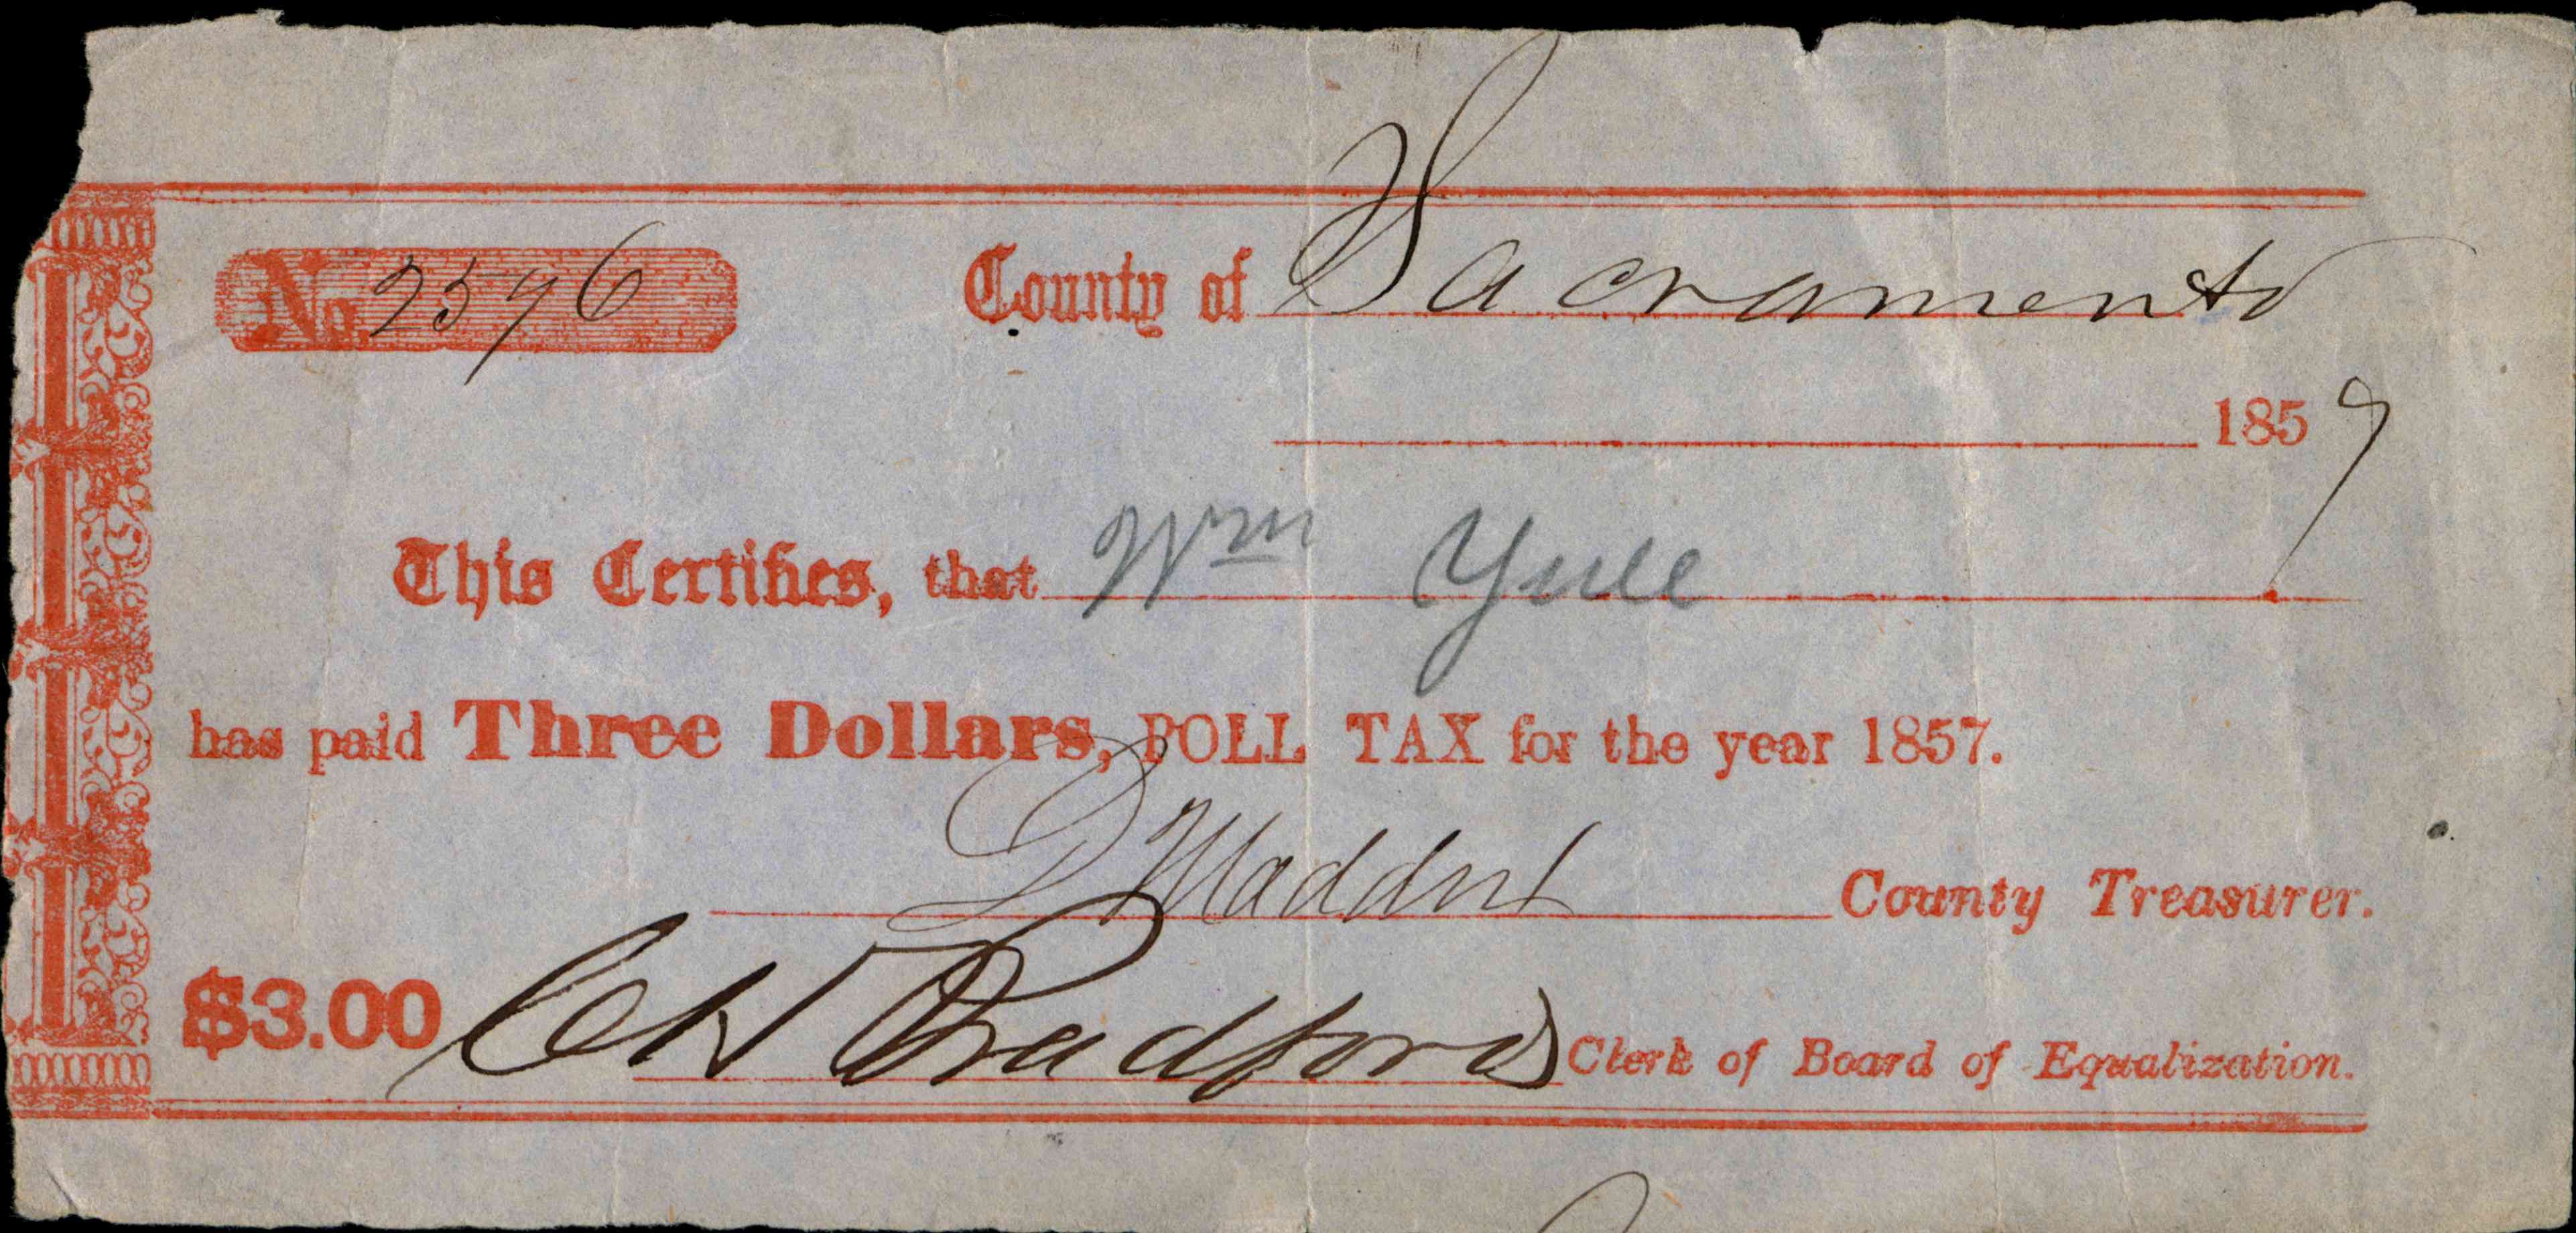 Poll tax for 1857